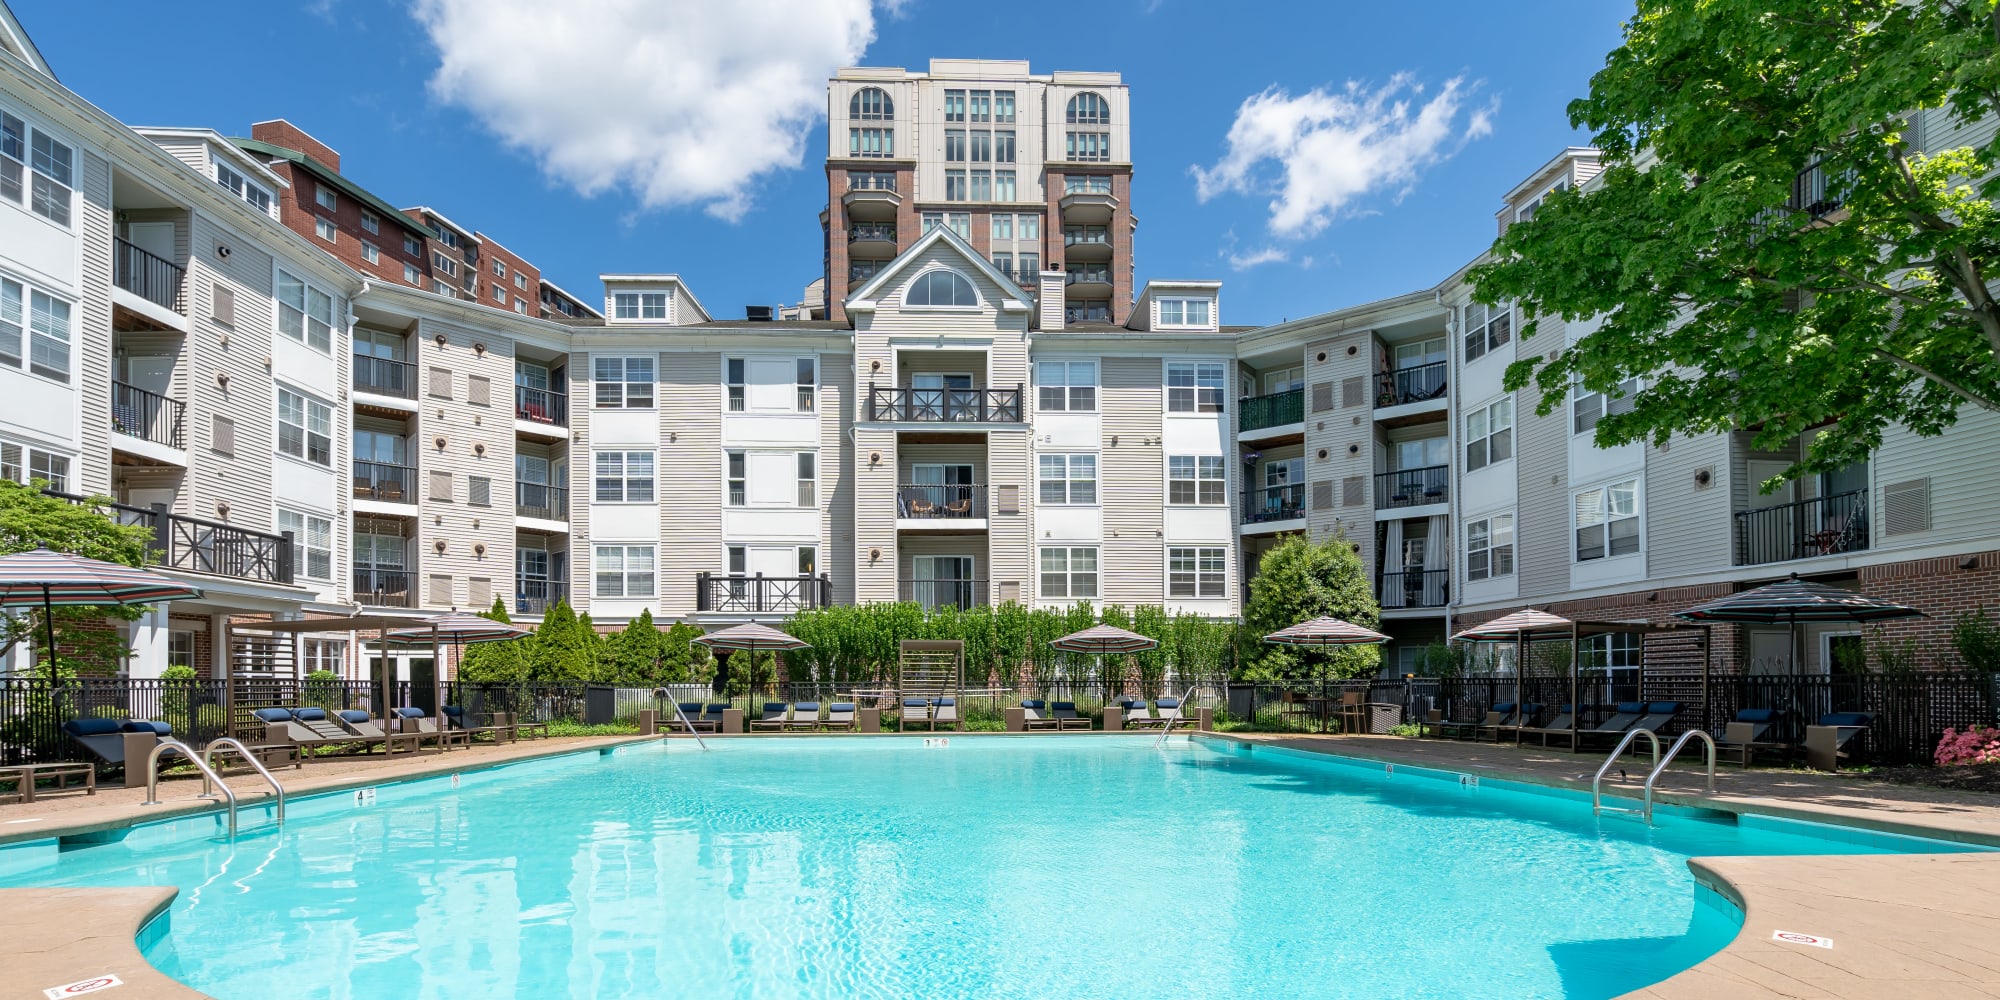 Apartments at Sofi Parc Grove in Stamford, Connecticut